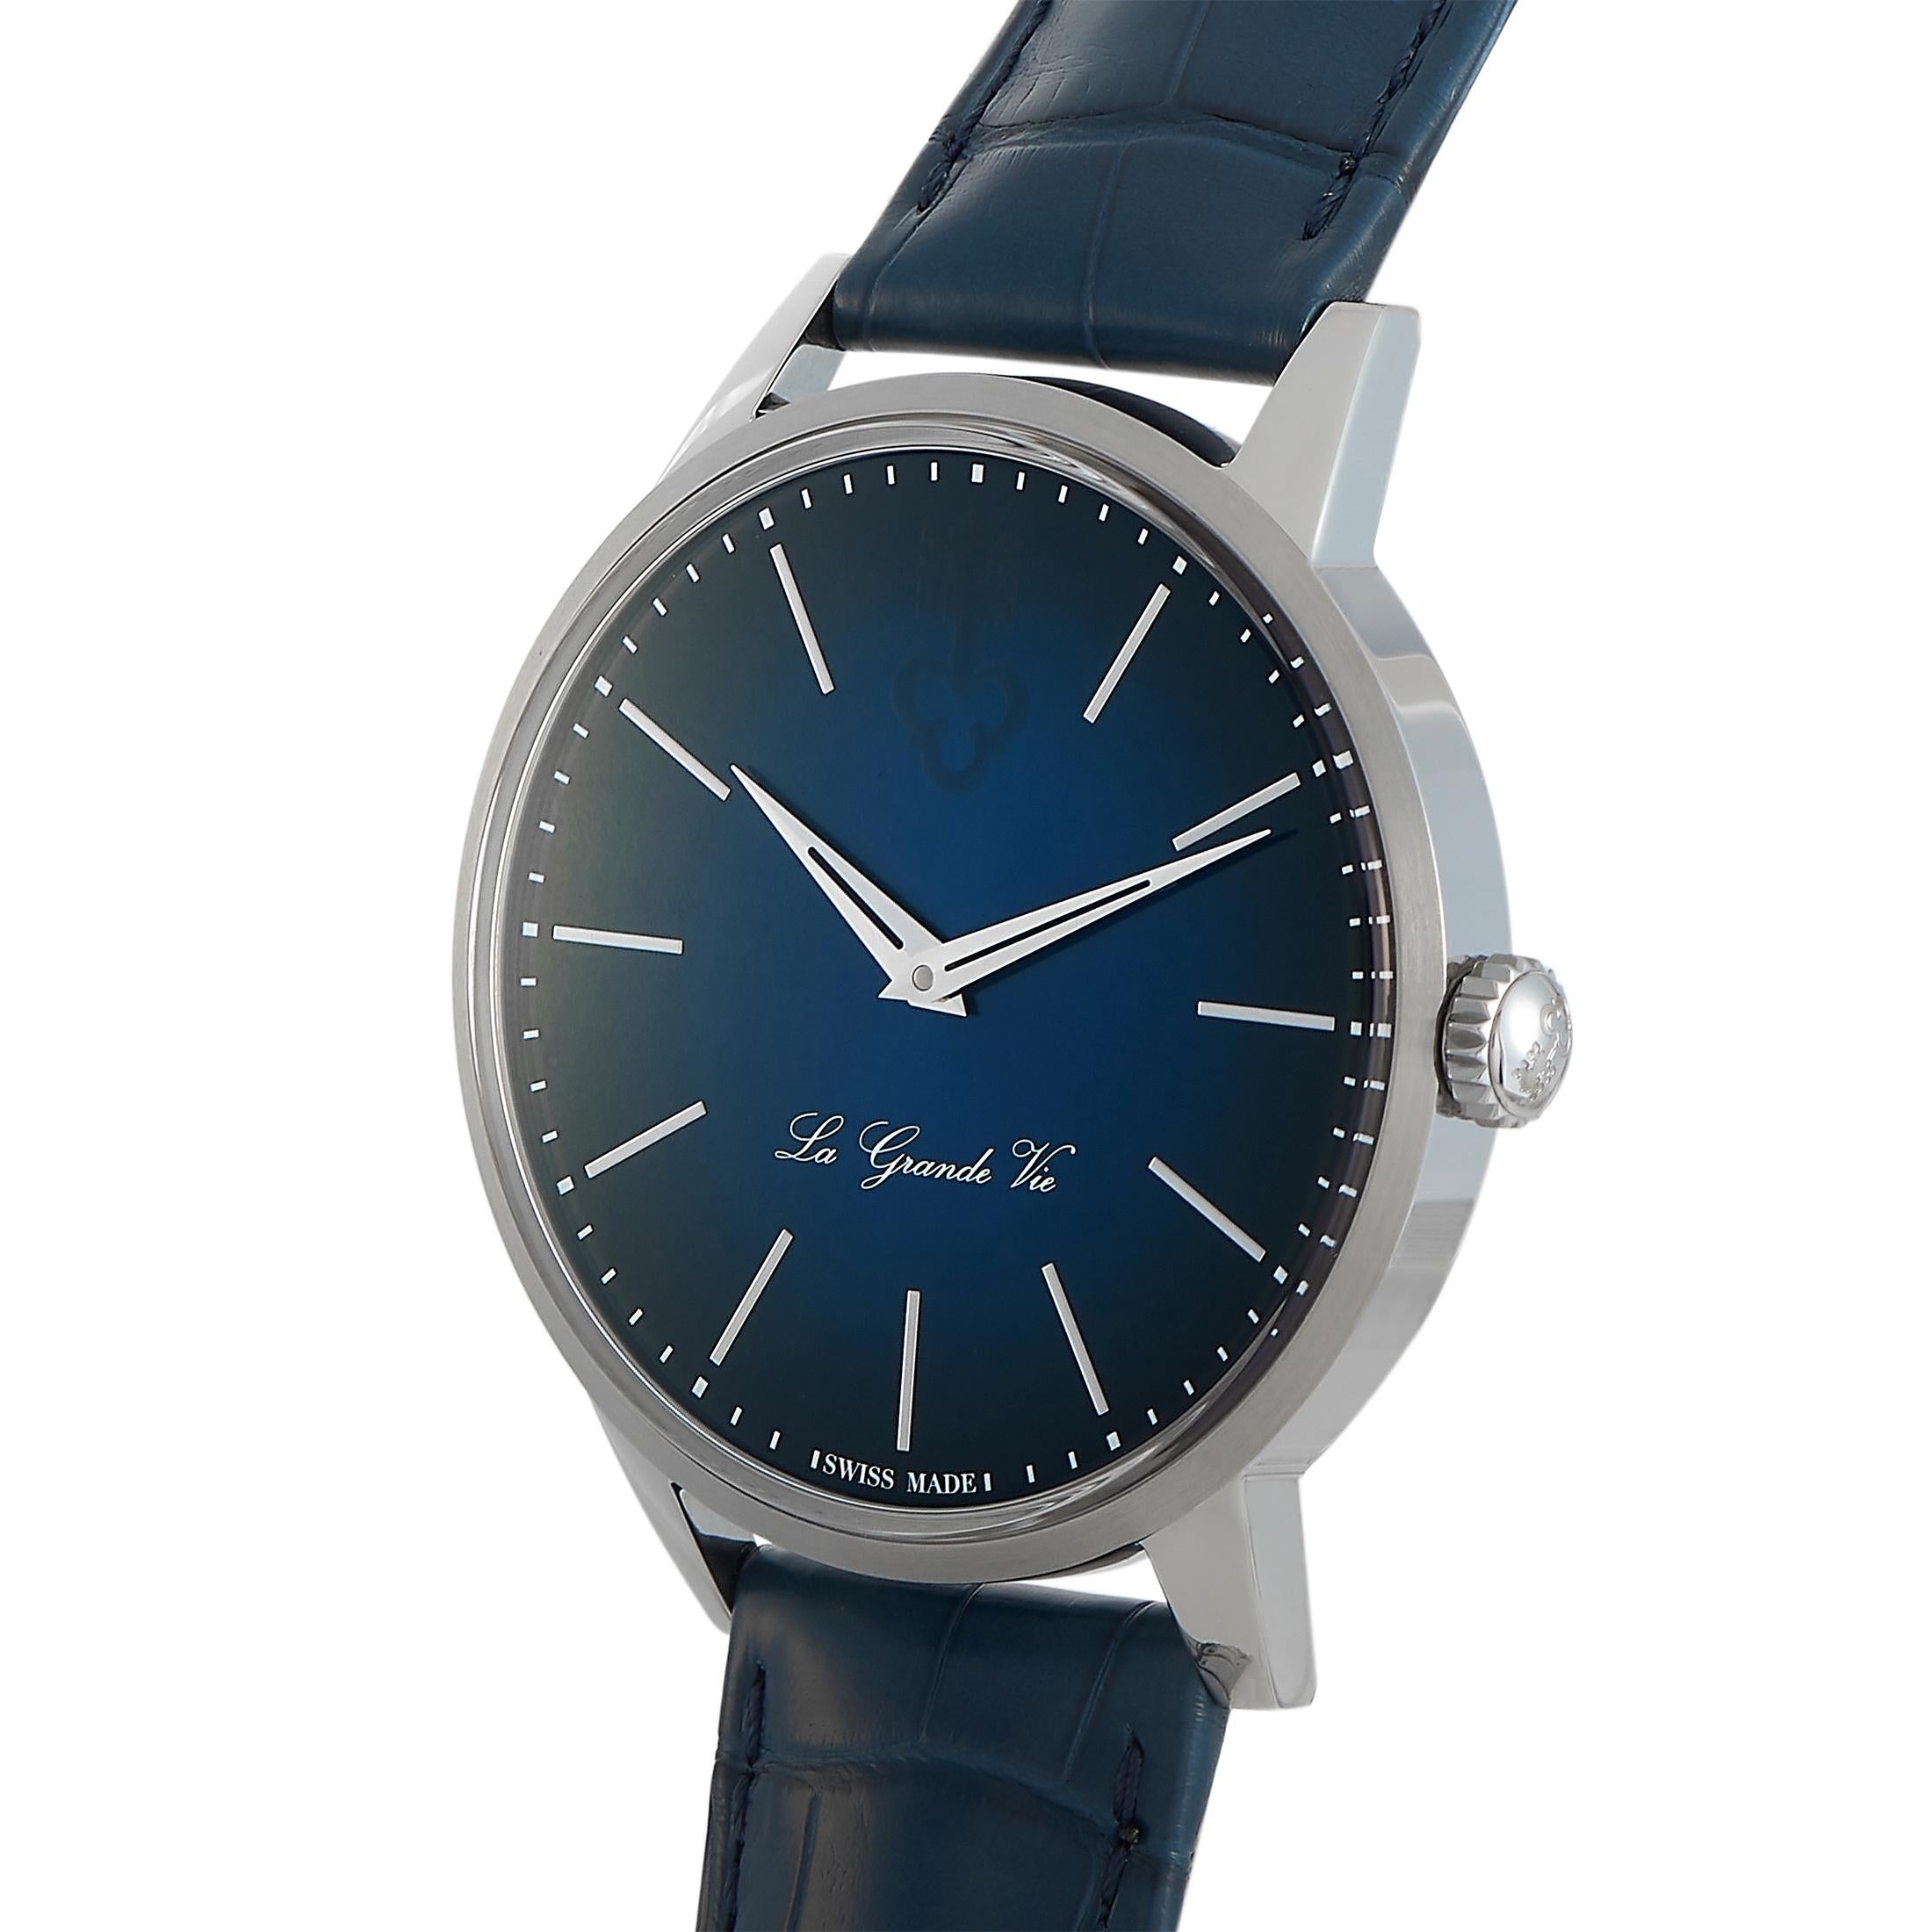 The Corum Heritage La Grande Vie watch, reference number 082.750.04/OF03, is a member of the esteemed “Heritage” collection.
 
 This timepiece comes with a 42 mm titanium case that boasts see-through back. On the blue dial, two central hands